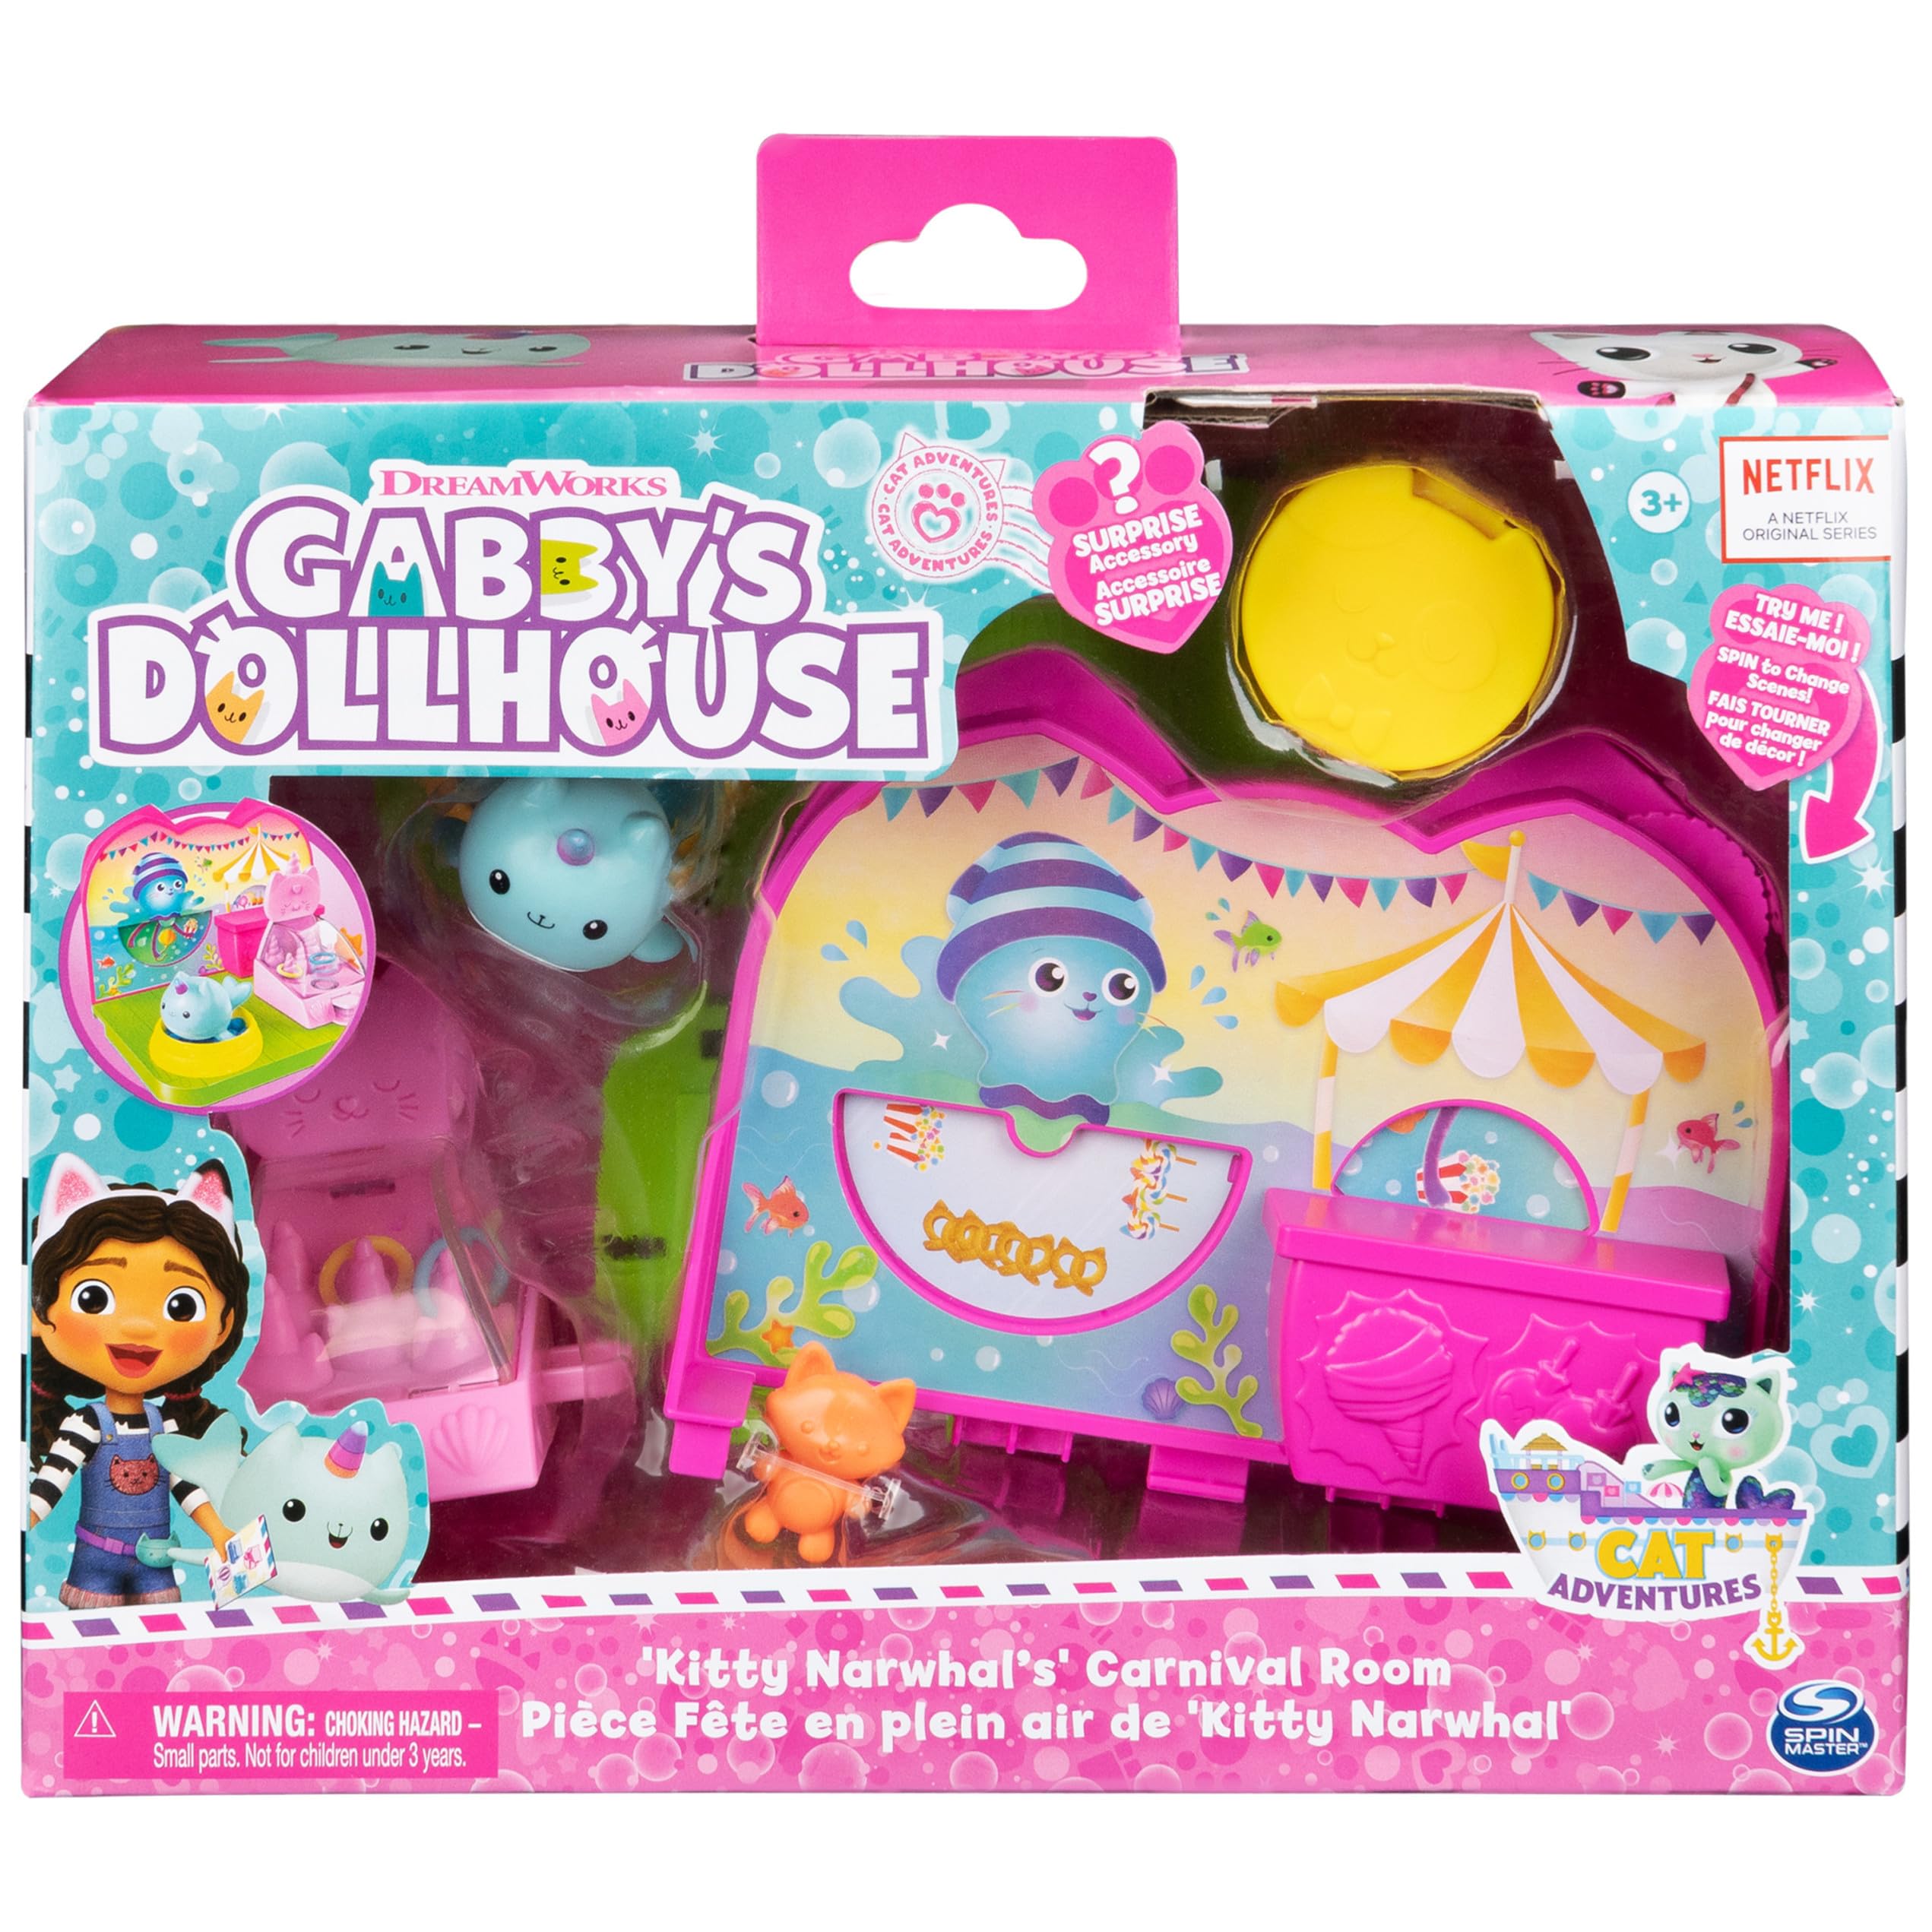 Gabby's Dollhouse Kitty Narwhal’s Carnival Room, with Toy Figure, Surprise Toys and Dollhouse Furniture, Kids Toys for Girls & Boys 3+